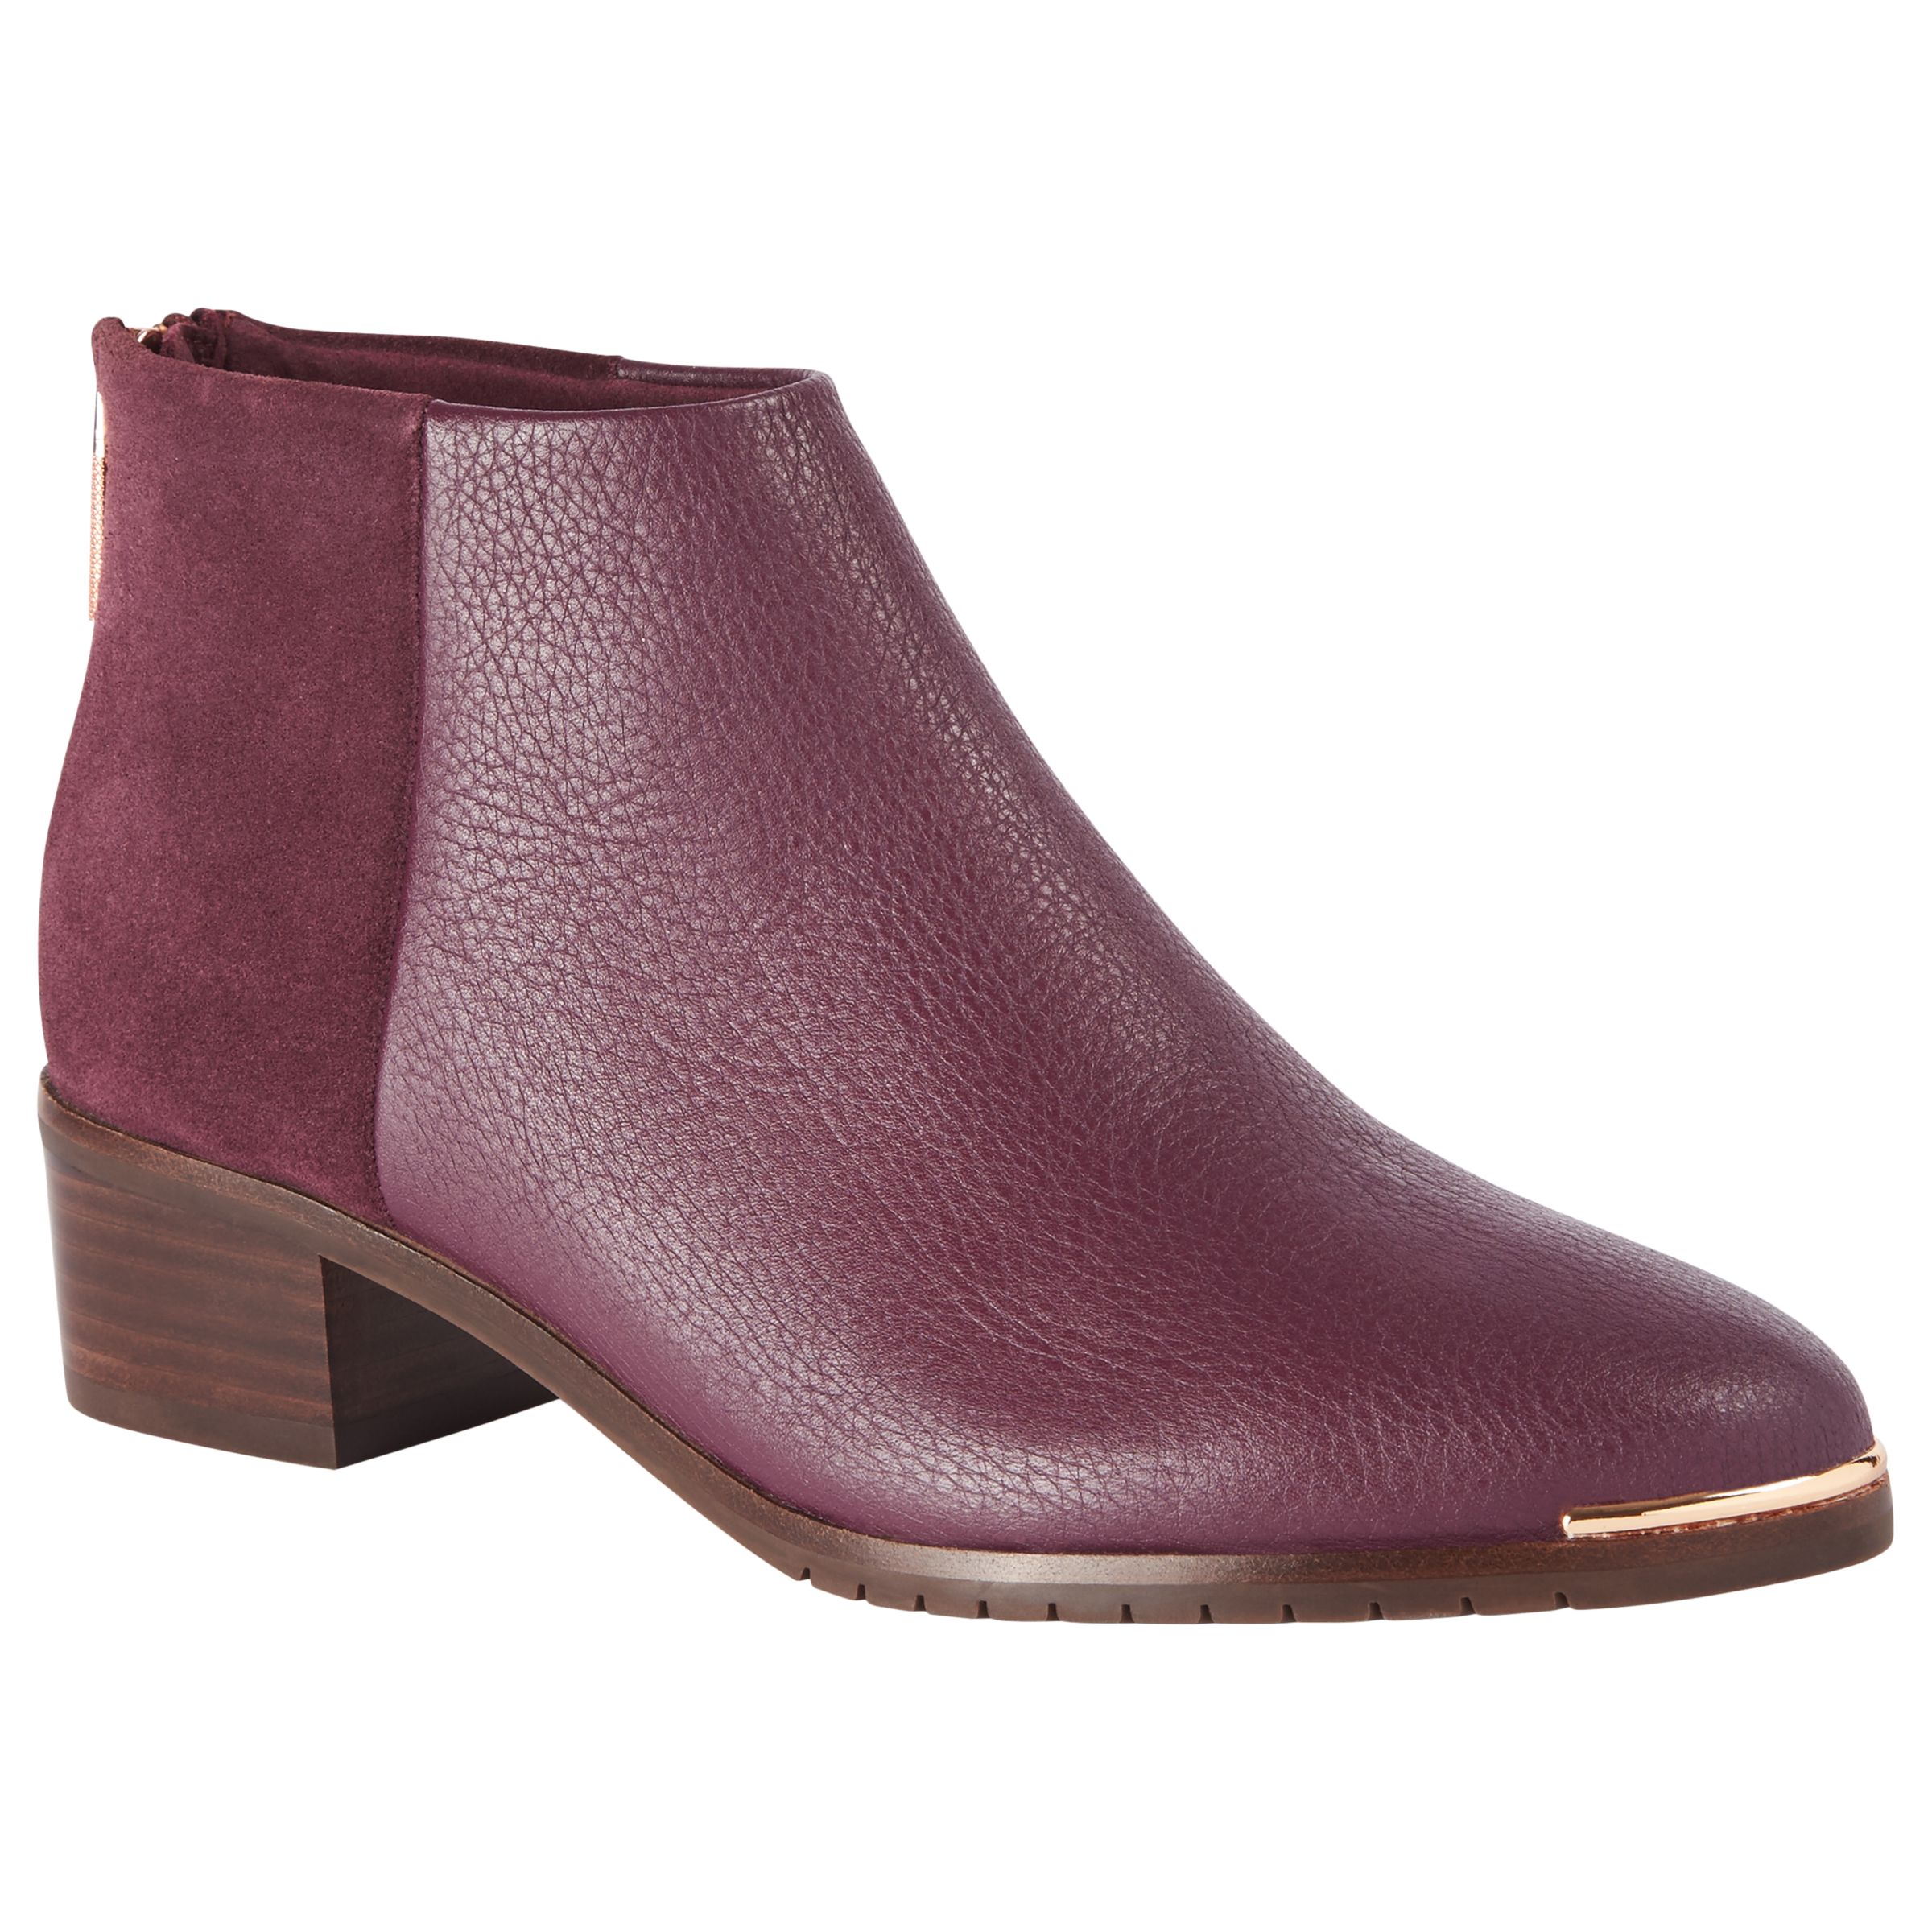 Ted Baker Sasybell Faux Fur Lined Block Heel Ankle Boots, Burgundy, 7